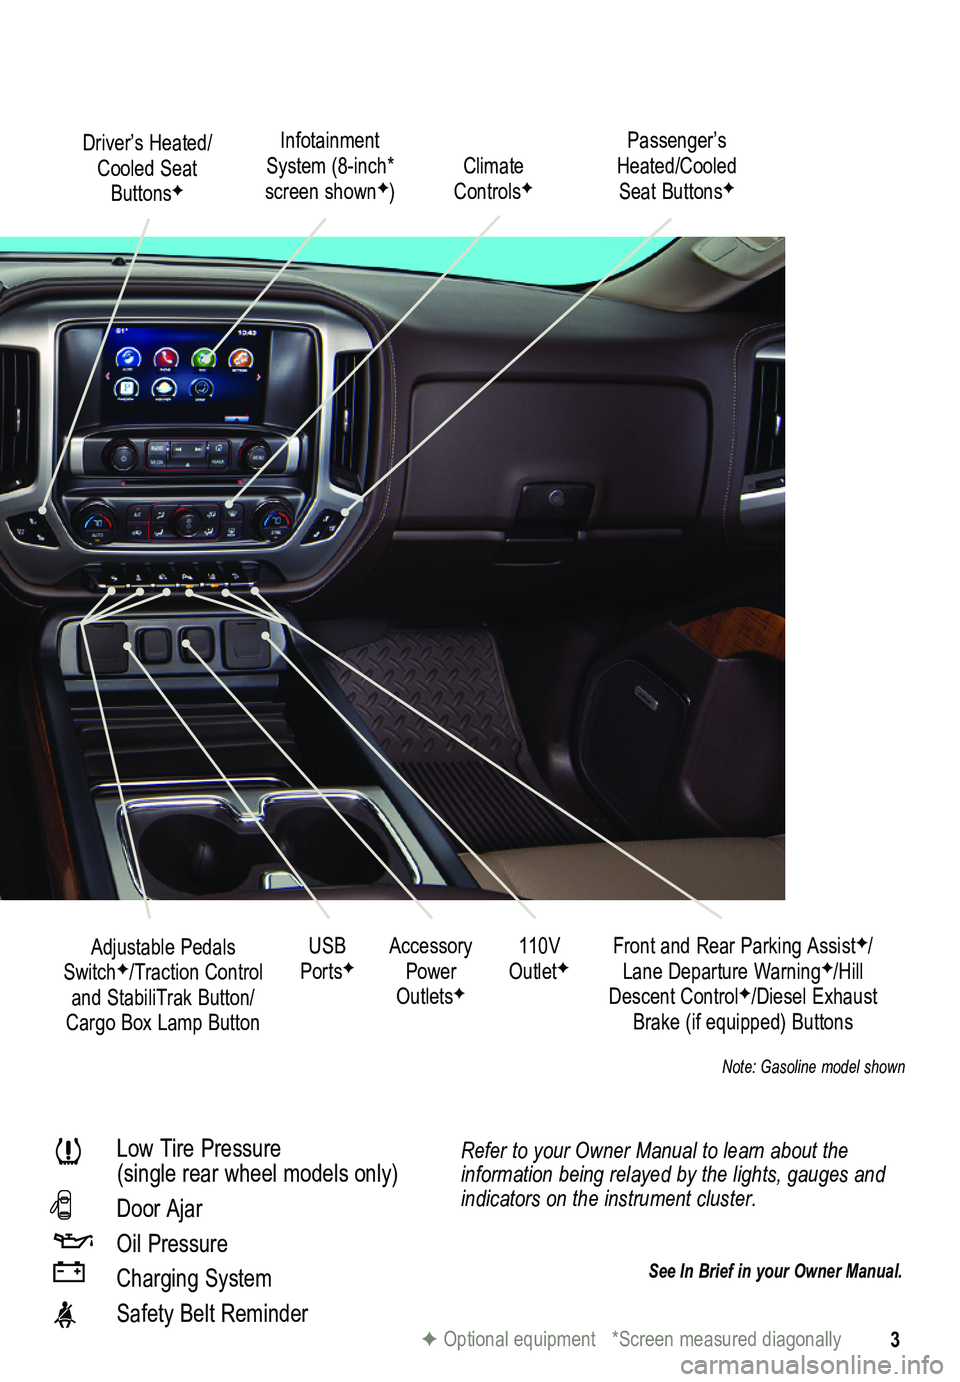 GMC SIERRA HD 2015  Get To Know Guide 3
Refer to your Owner Manual to learn about the information being relayed by the lights, gauges and indicators on the instrument cluster.
See In Brief in your Owner Manual.
Driver’s Heated/Cooled Se